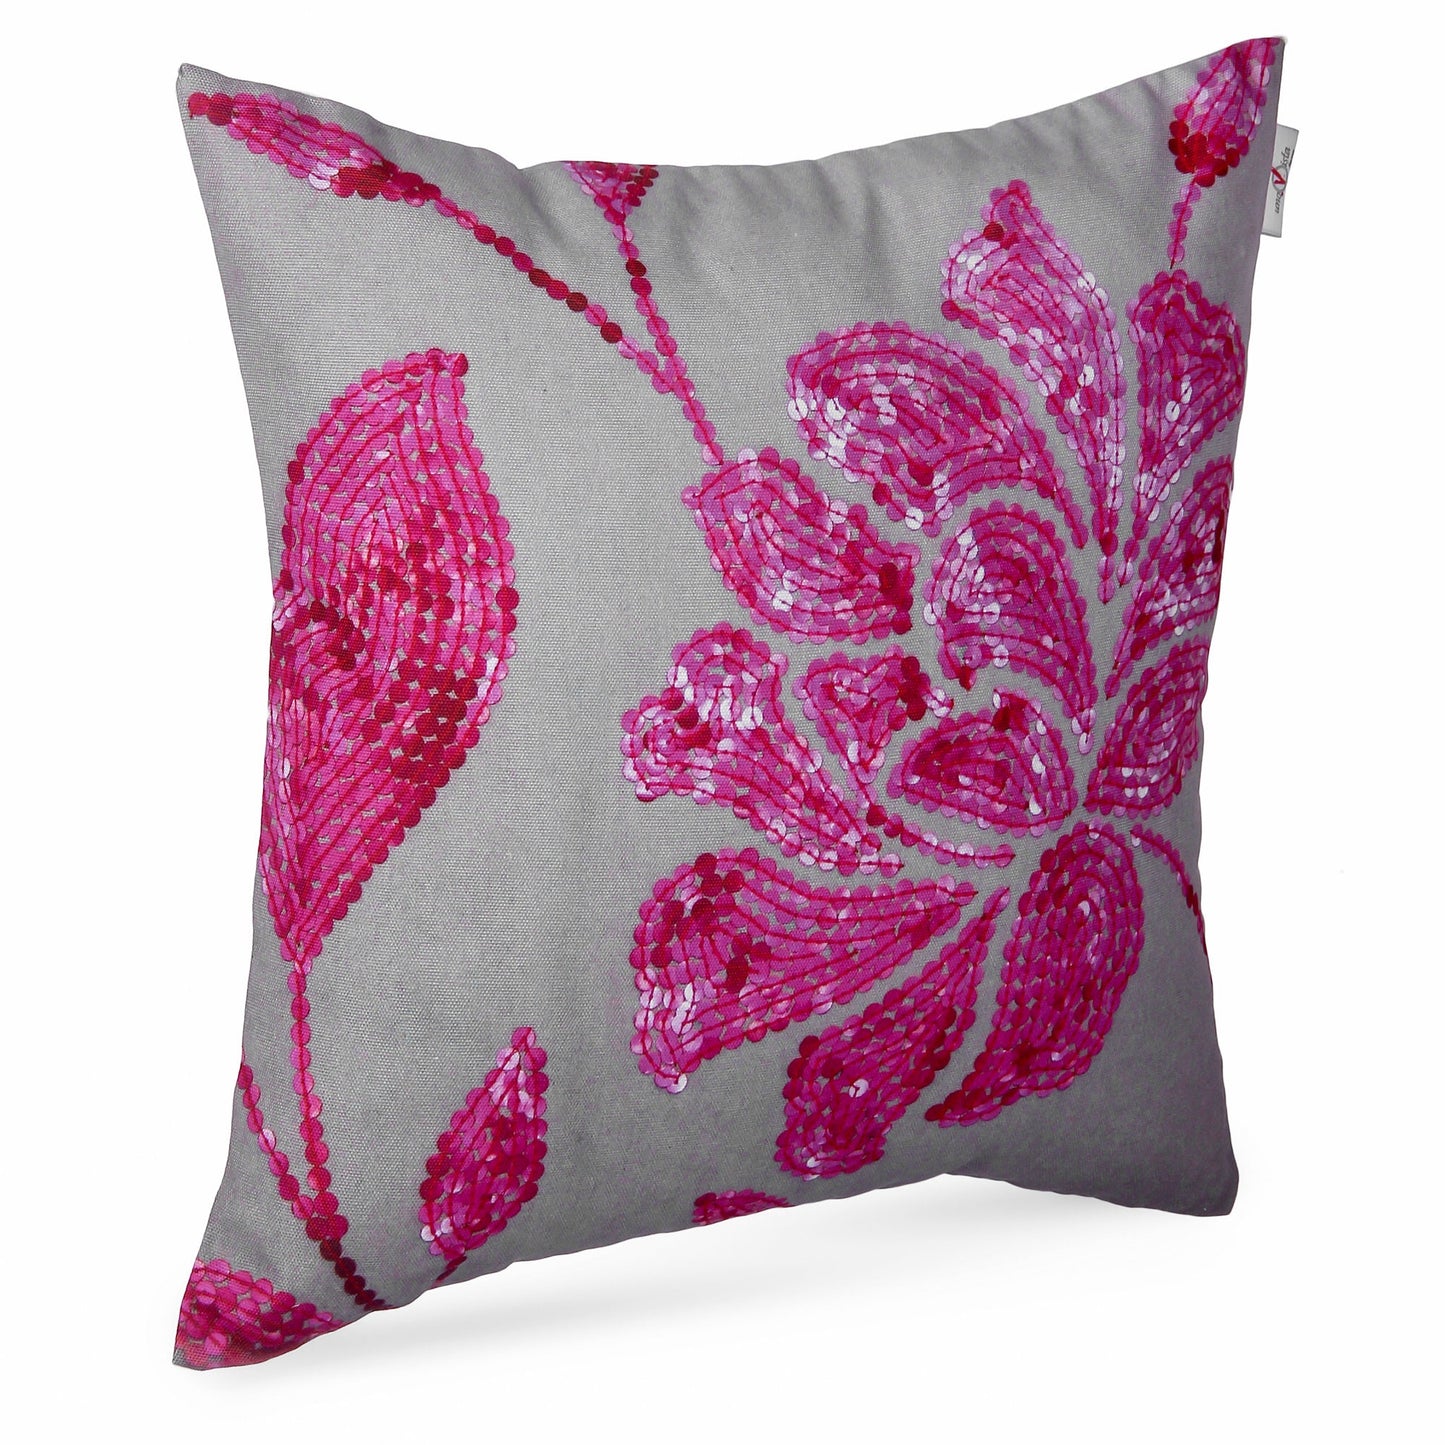 Pink Sequins Digital Print Pillow Cover 18x18 Sparkling Cushion Cover